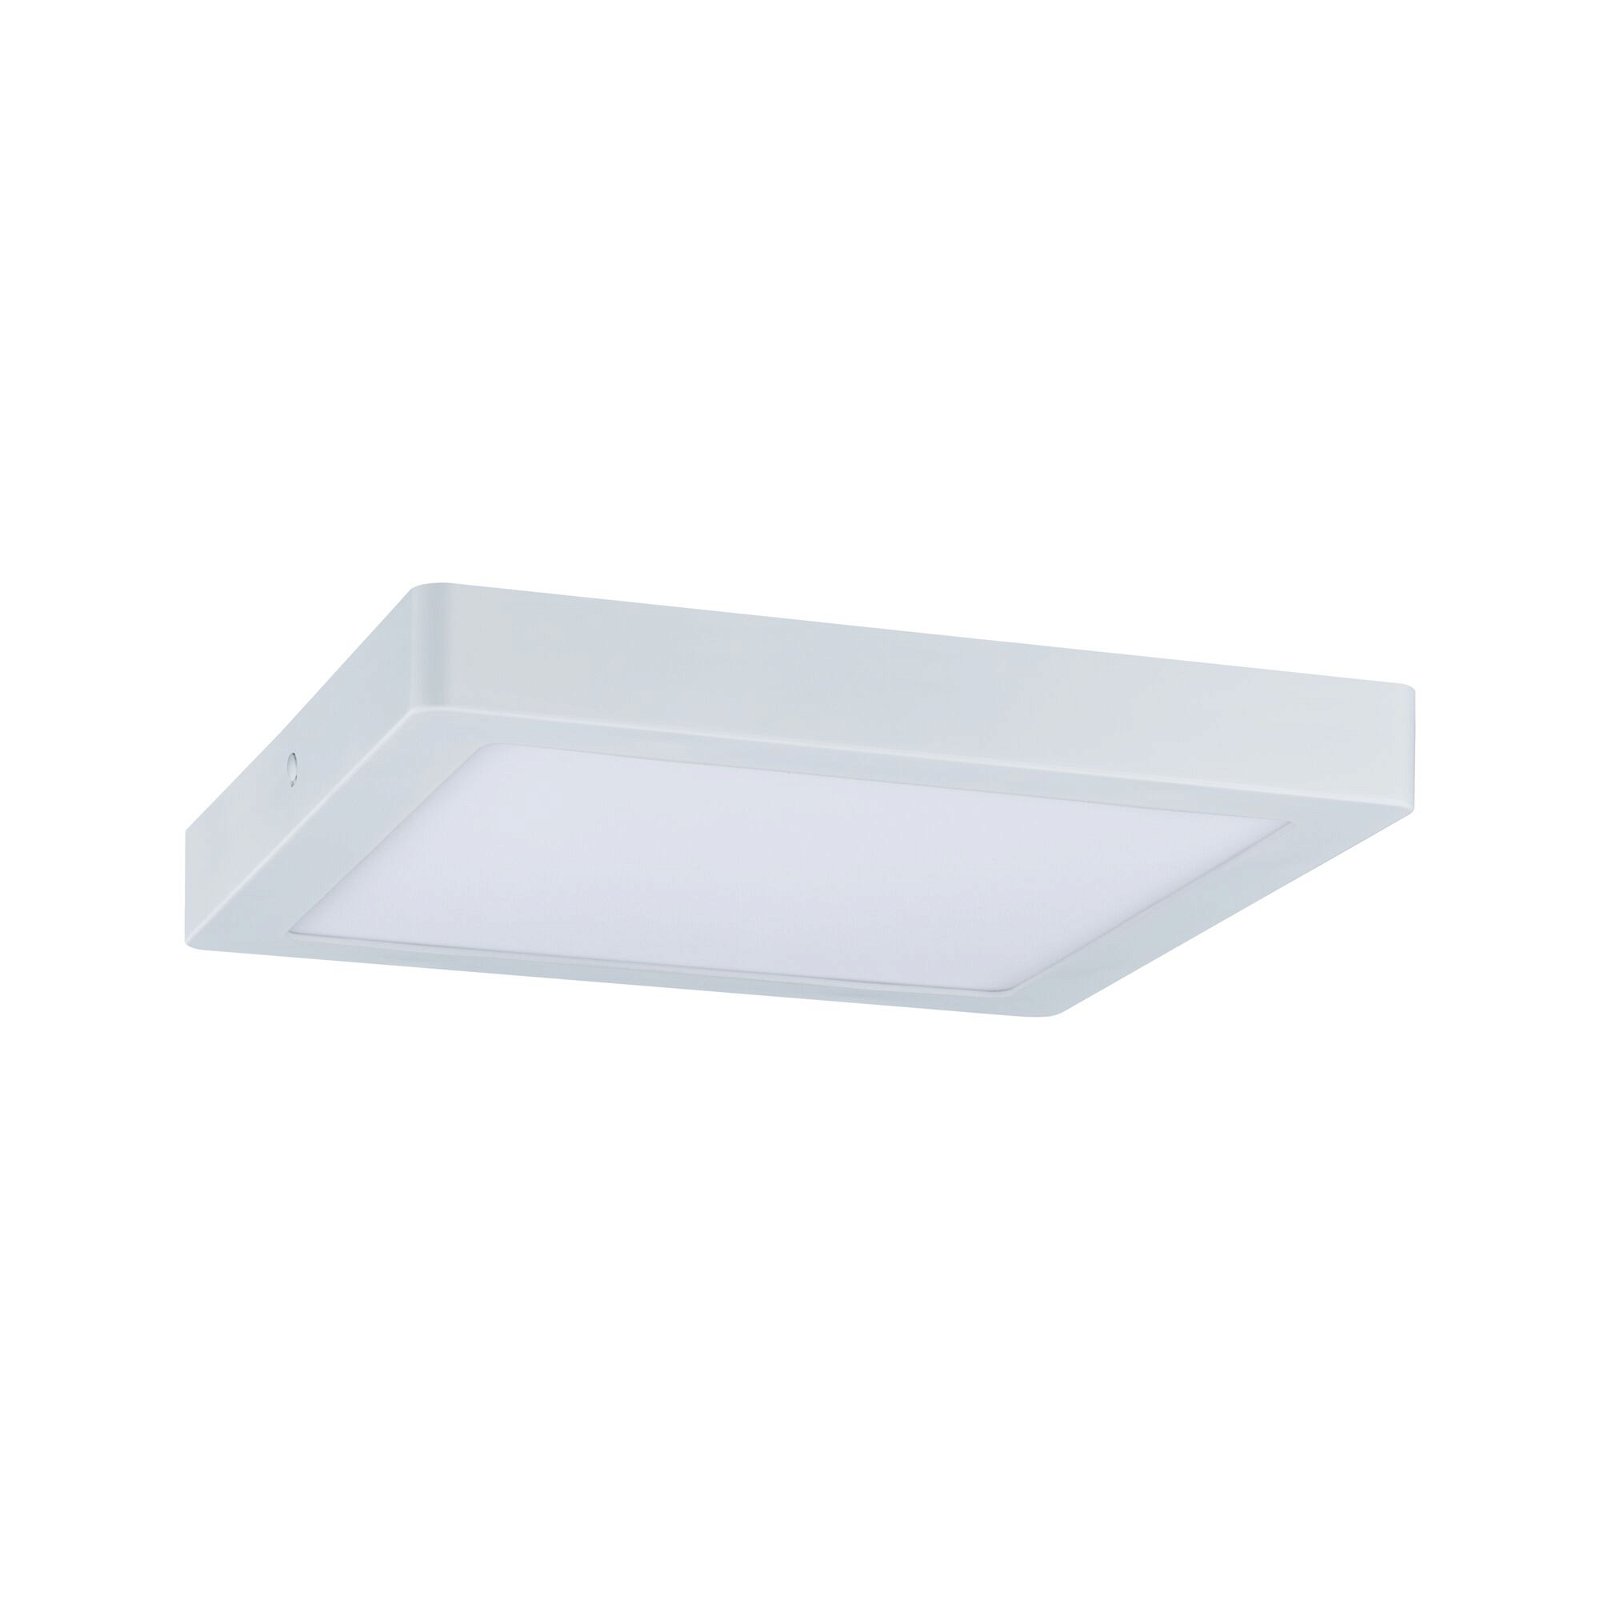 LED Panel Abia square 300x300mm 22W 2000lm 4000K White